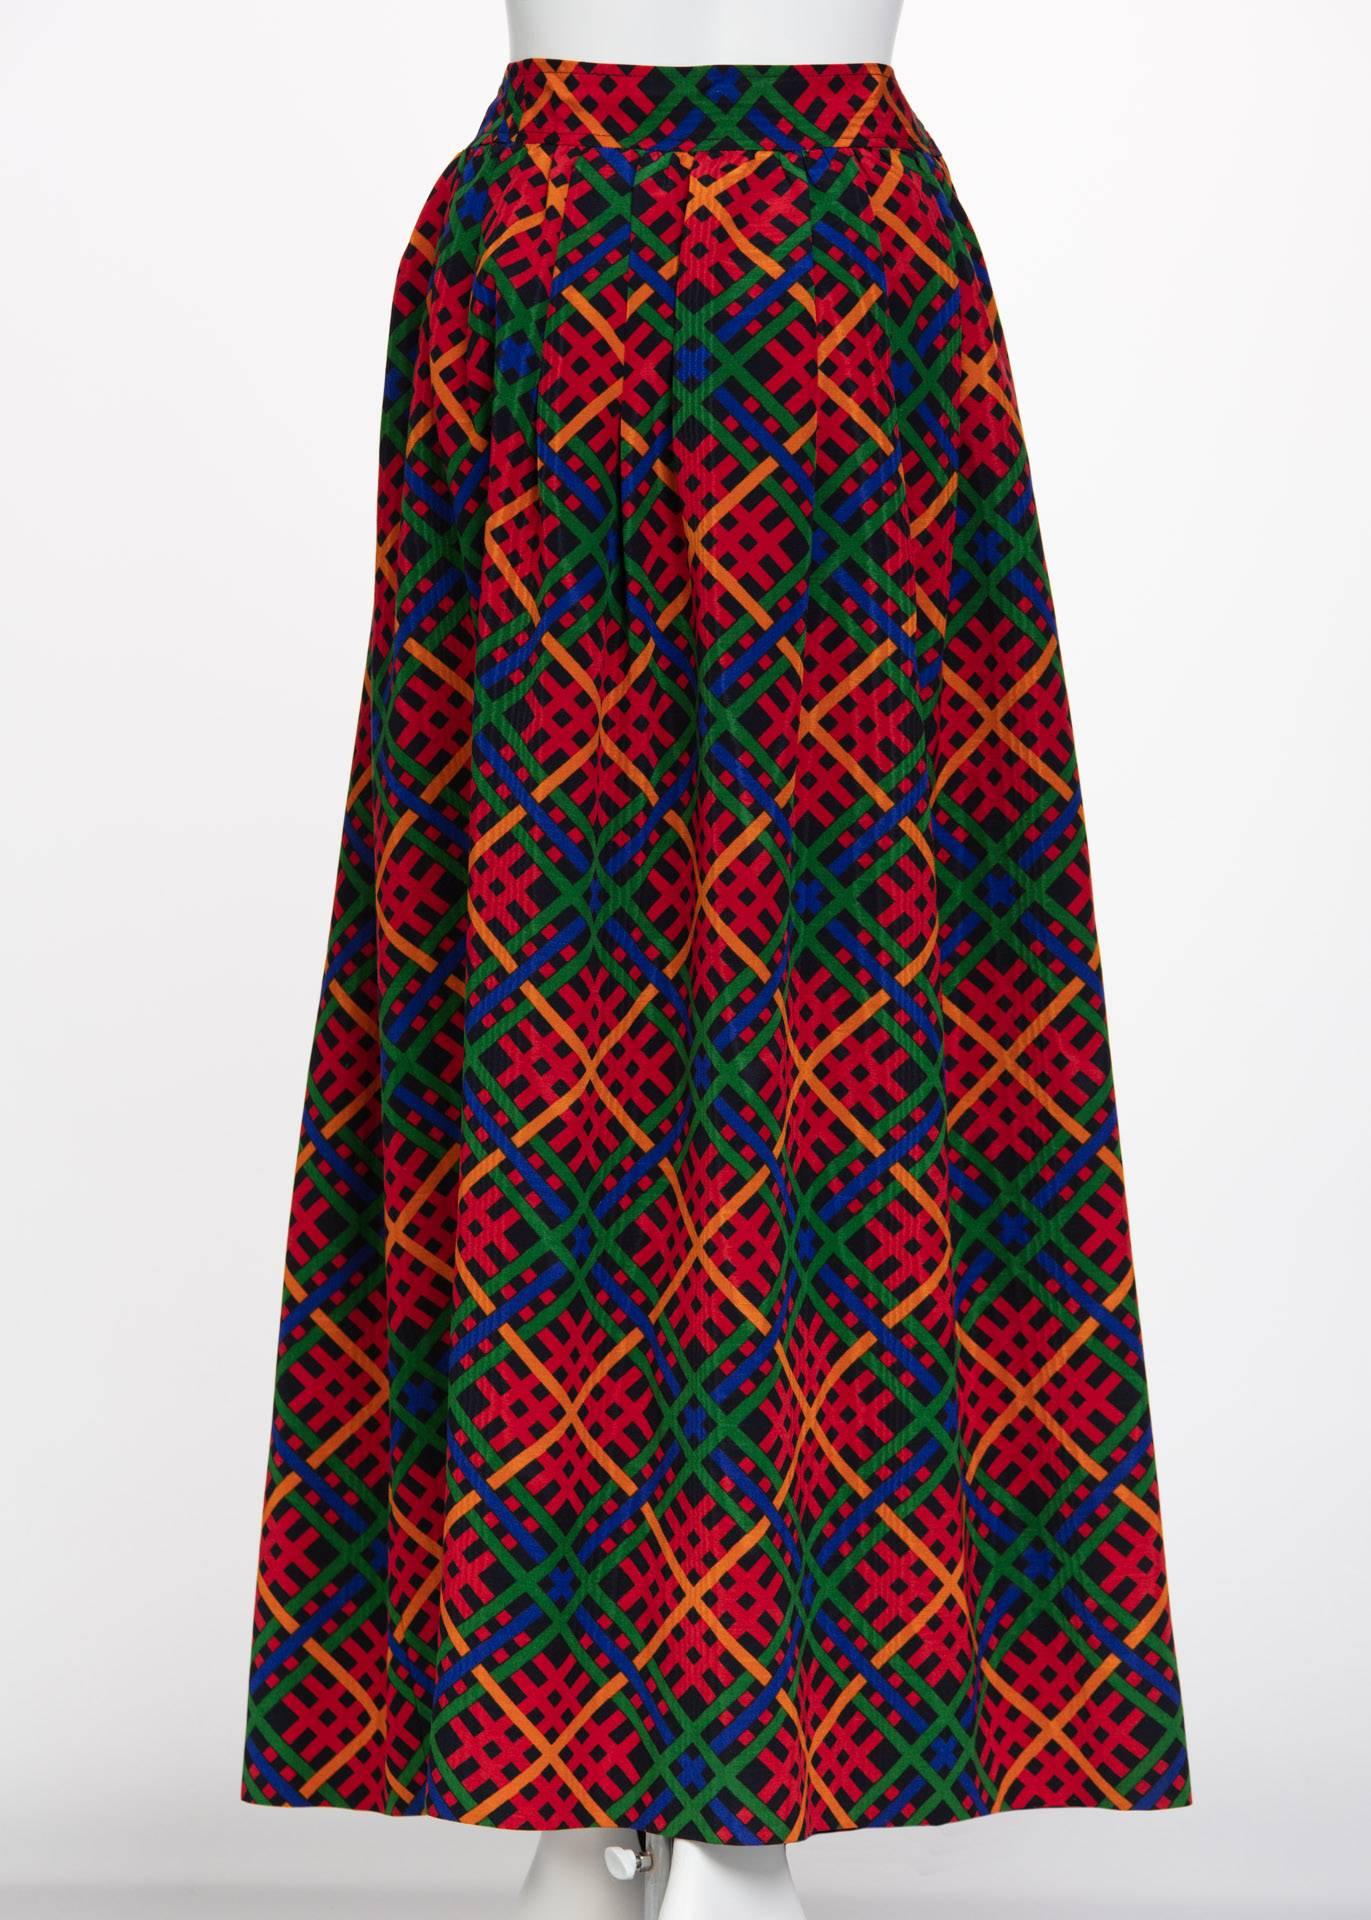 Yves Saint Laurent  Red Multicolored Plaid Full Maxi Skirt YSL , 1970s  In Excellent Condition For Sale In Boca Raton, FL